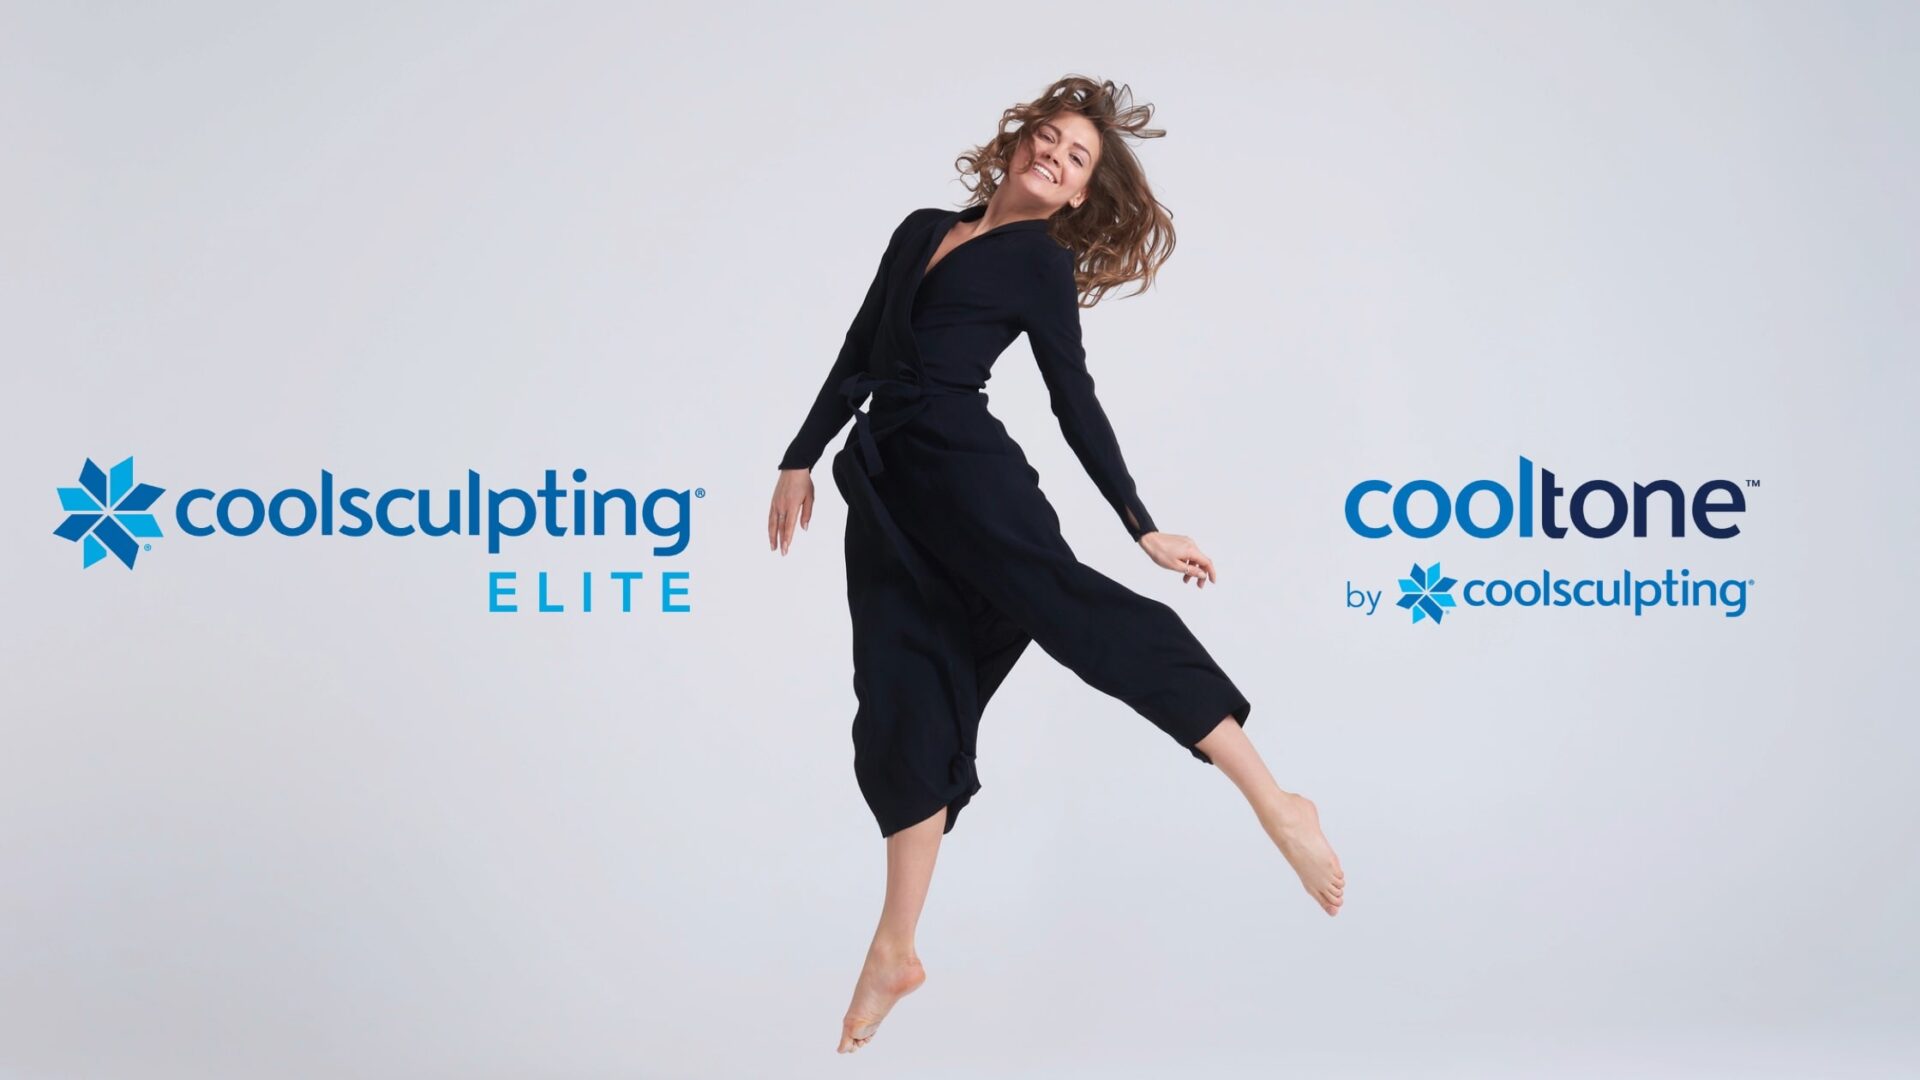 CoolSculpting and CoolTone Ultimate BodySculpting Duo DCA Advanced BodySculpting Center